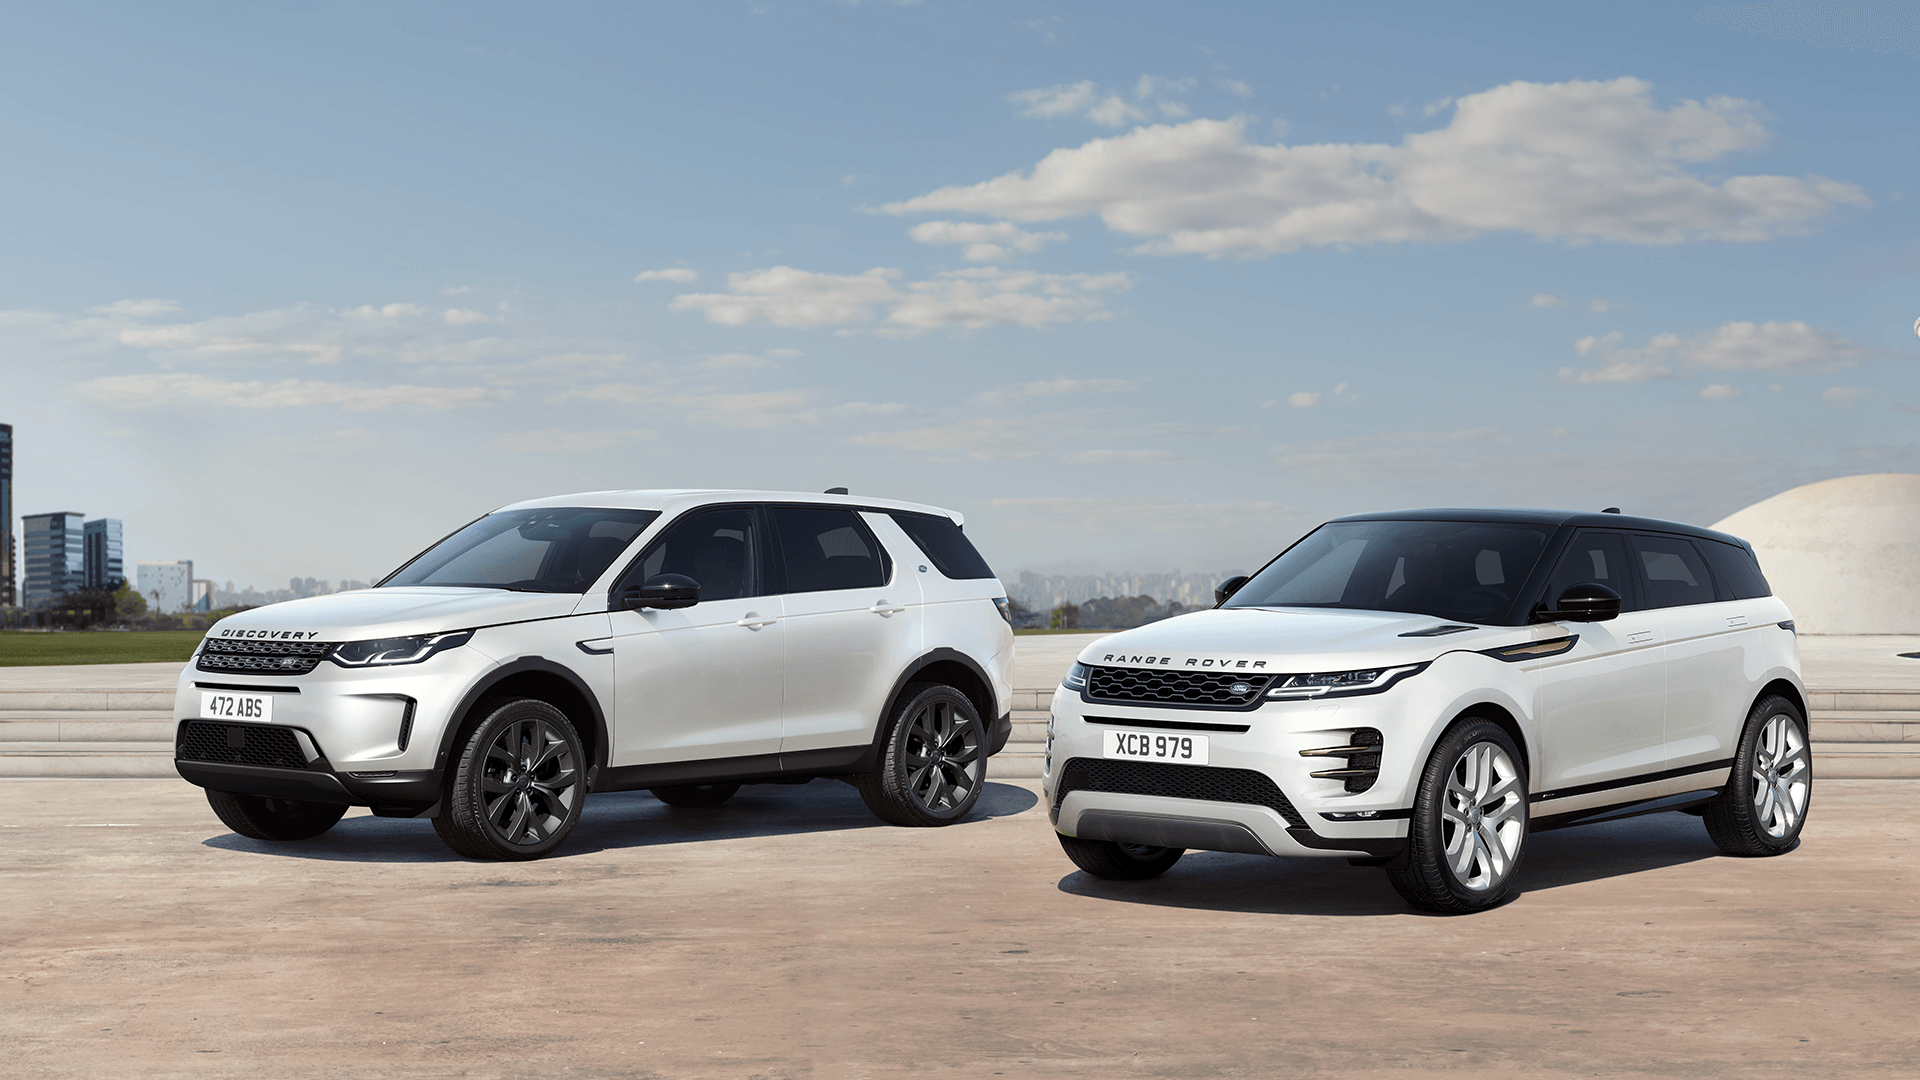 LAND ROVER BEGINS DELIVERY OF BS-VI PETROL DERIVATIVES OF NEW RANGE ROVER EVOQUE AND NEW DISCOVERY SPORT